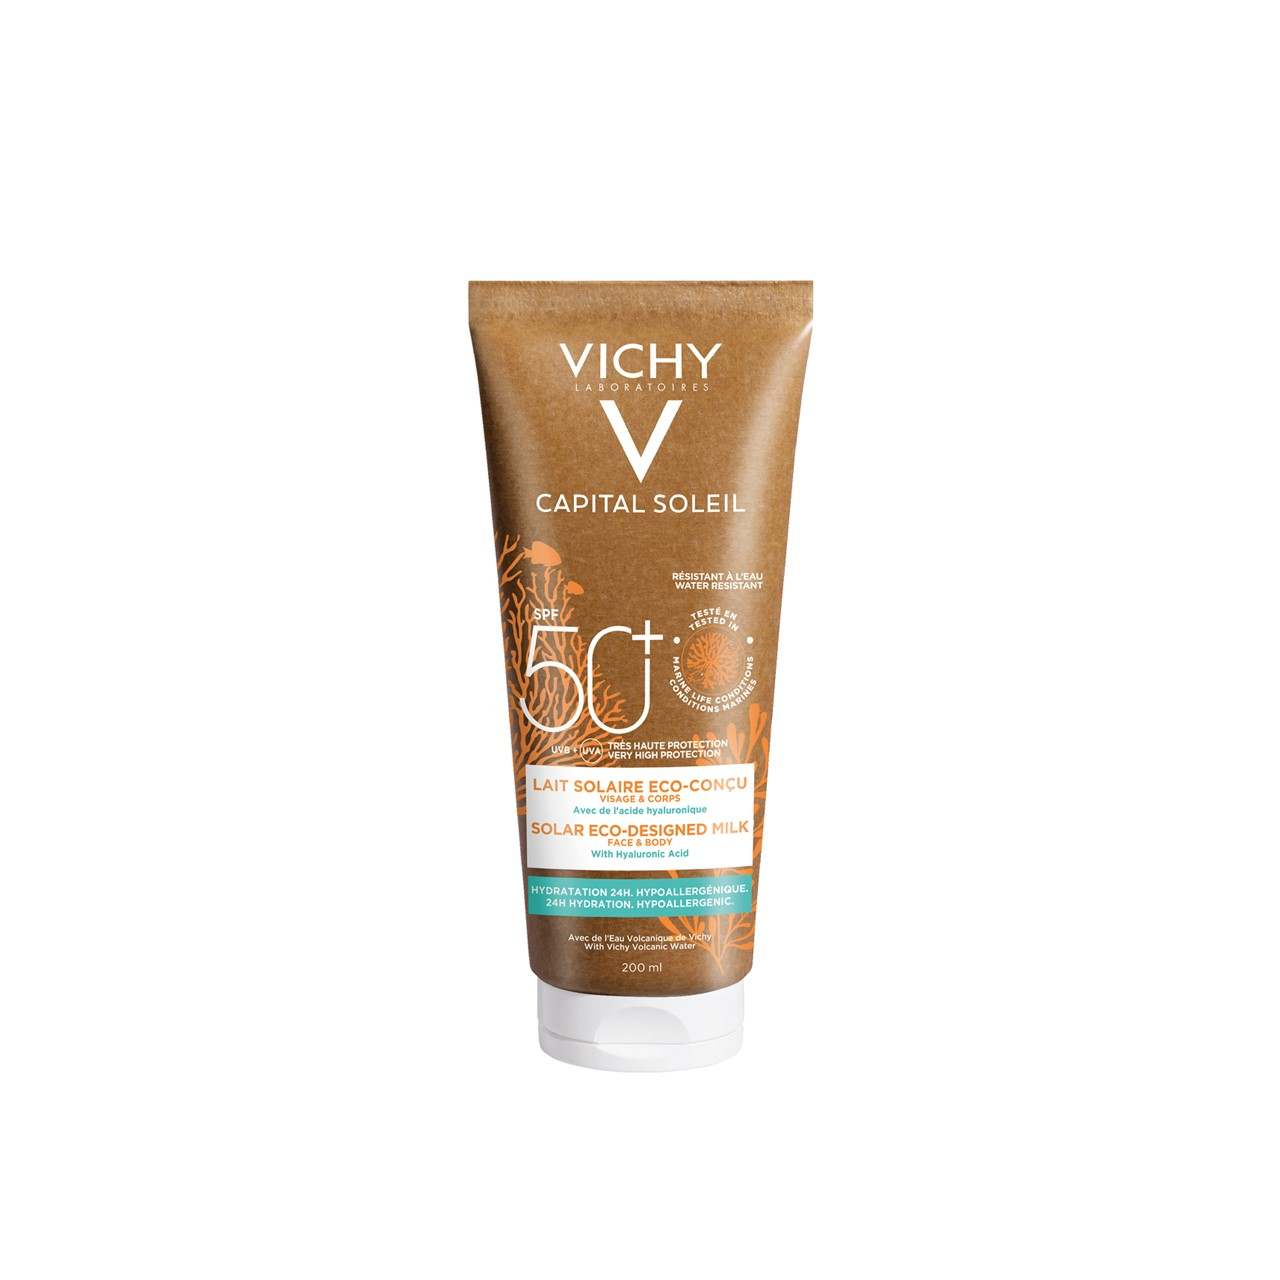 Protective Cream SPF50+ 3-in-1 Cleansing Milk Capital Soleil 100ml- Vichy -  Easypara